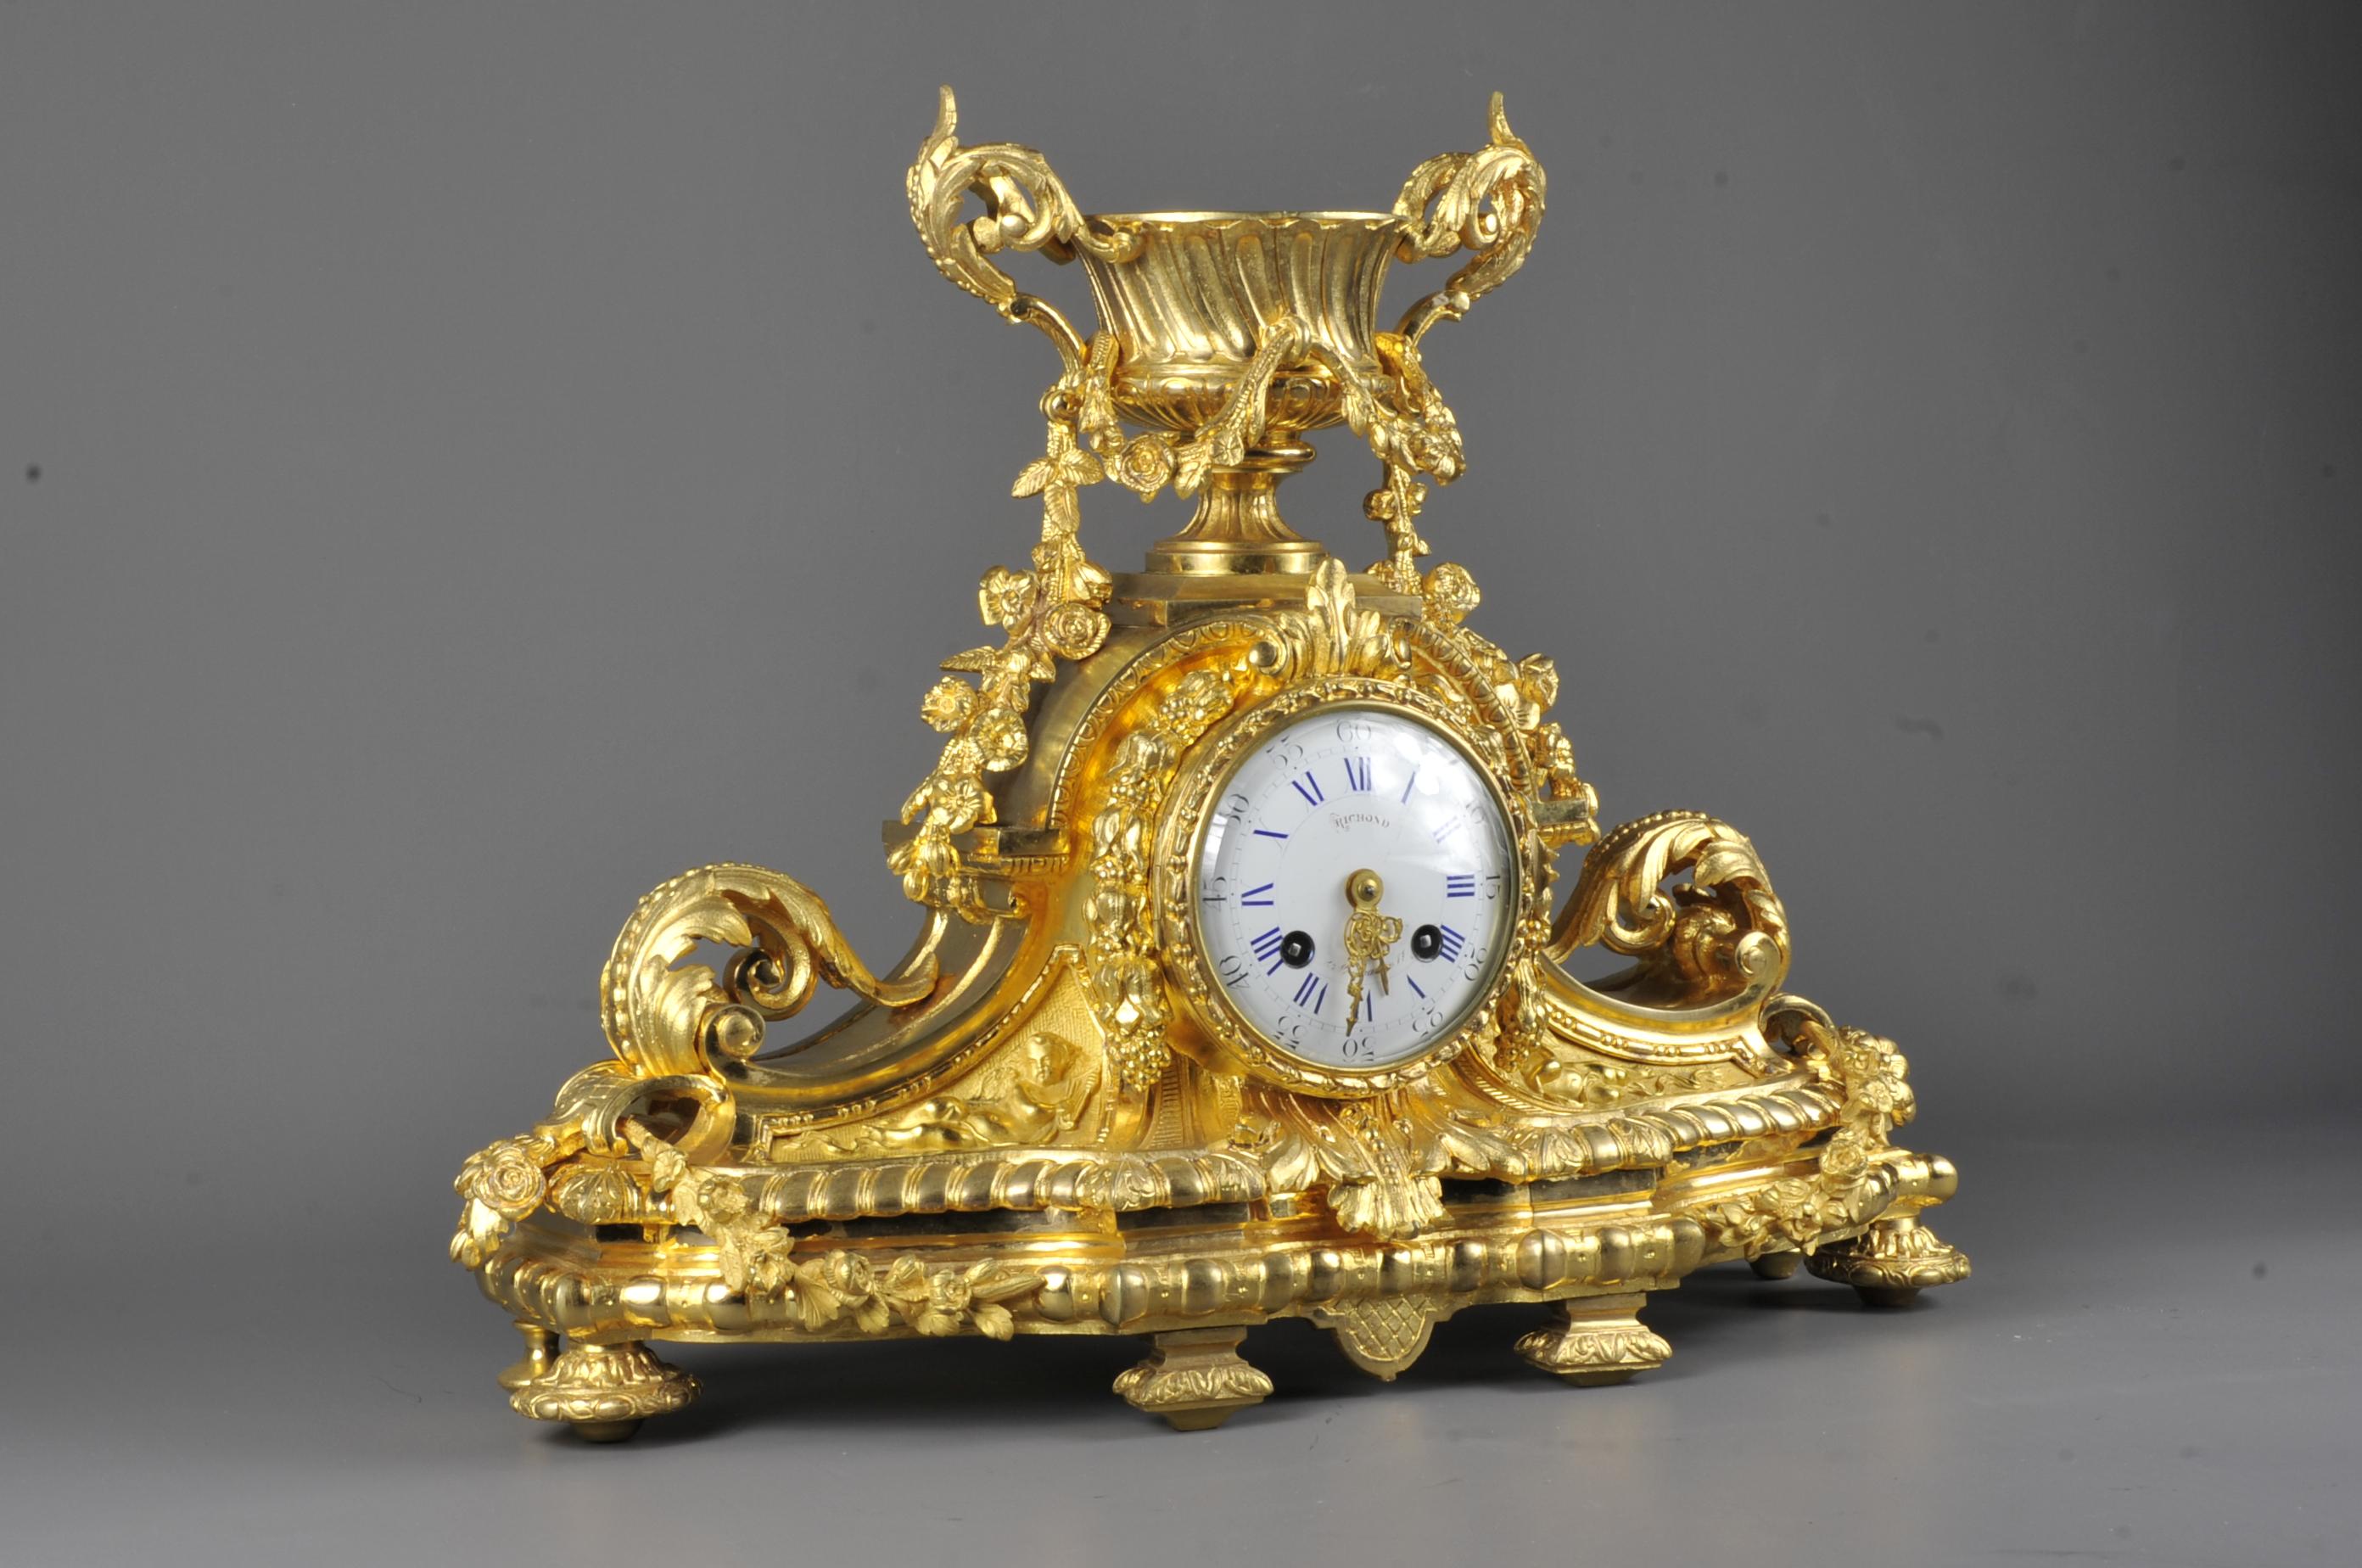 Magnificent Napoleon III clock in finely chiseled gilt bronze with a lush decoration inspired by Louis XVI.
Enamelled dial signed Richond, Japy Frères movement in Paris.

Superb original gilding.

Benoît Félix Richond, born November 12, 1795 in